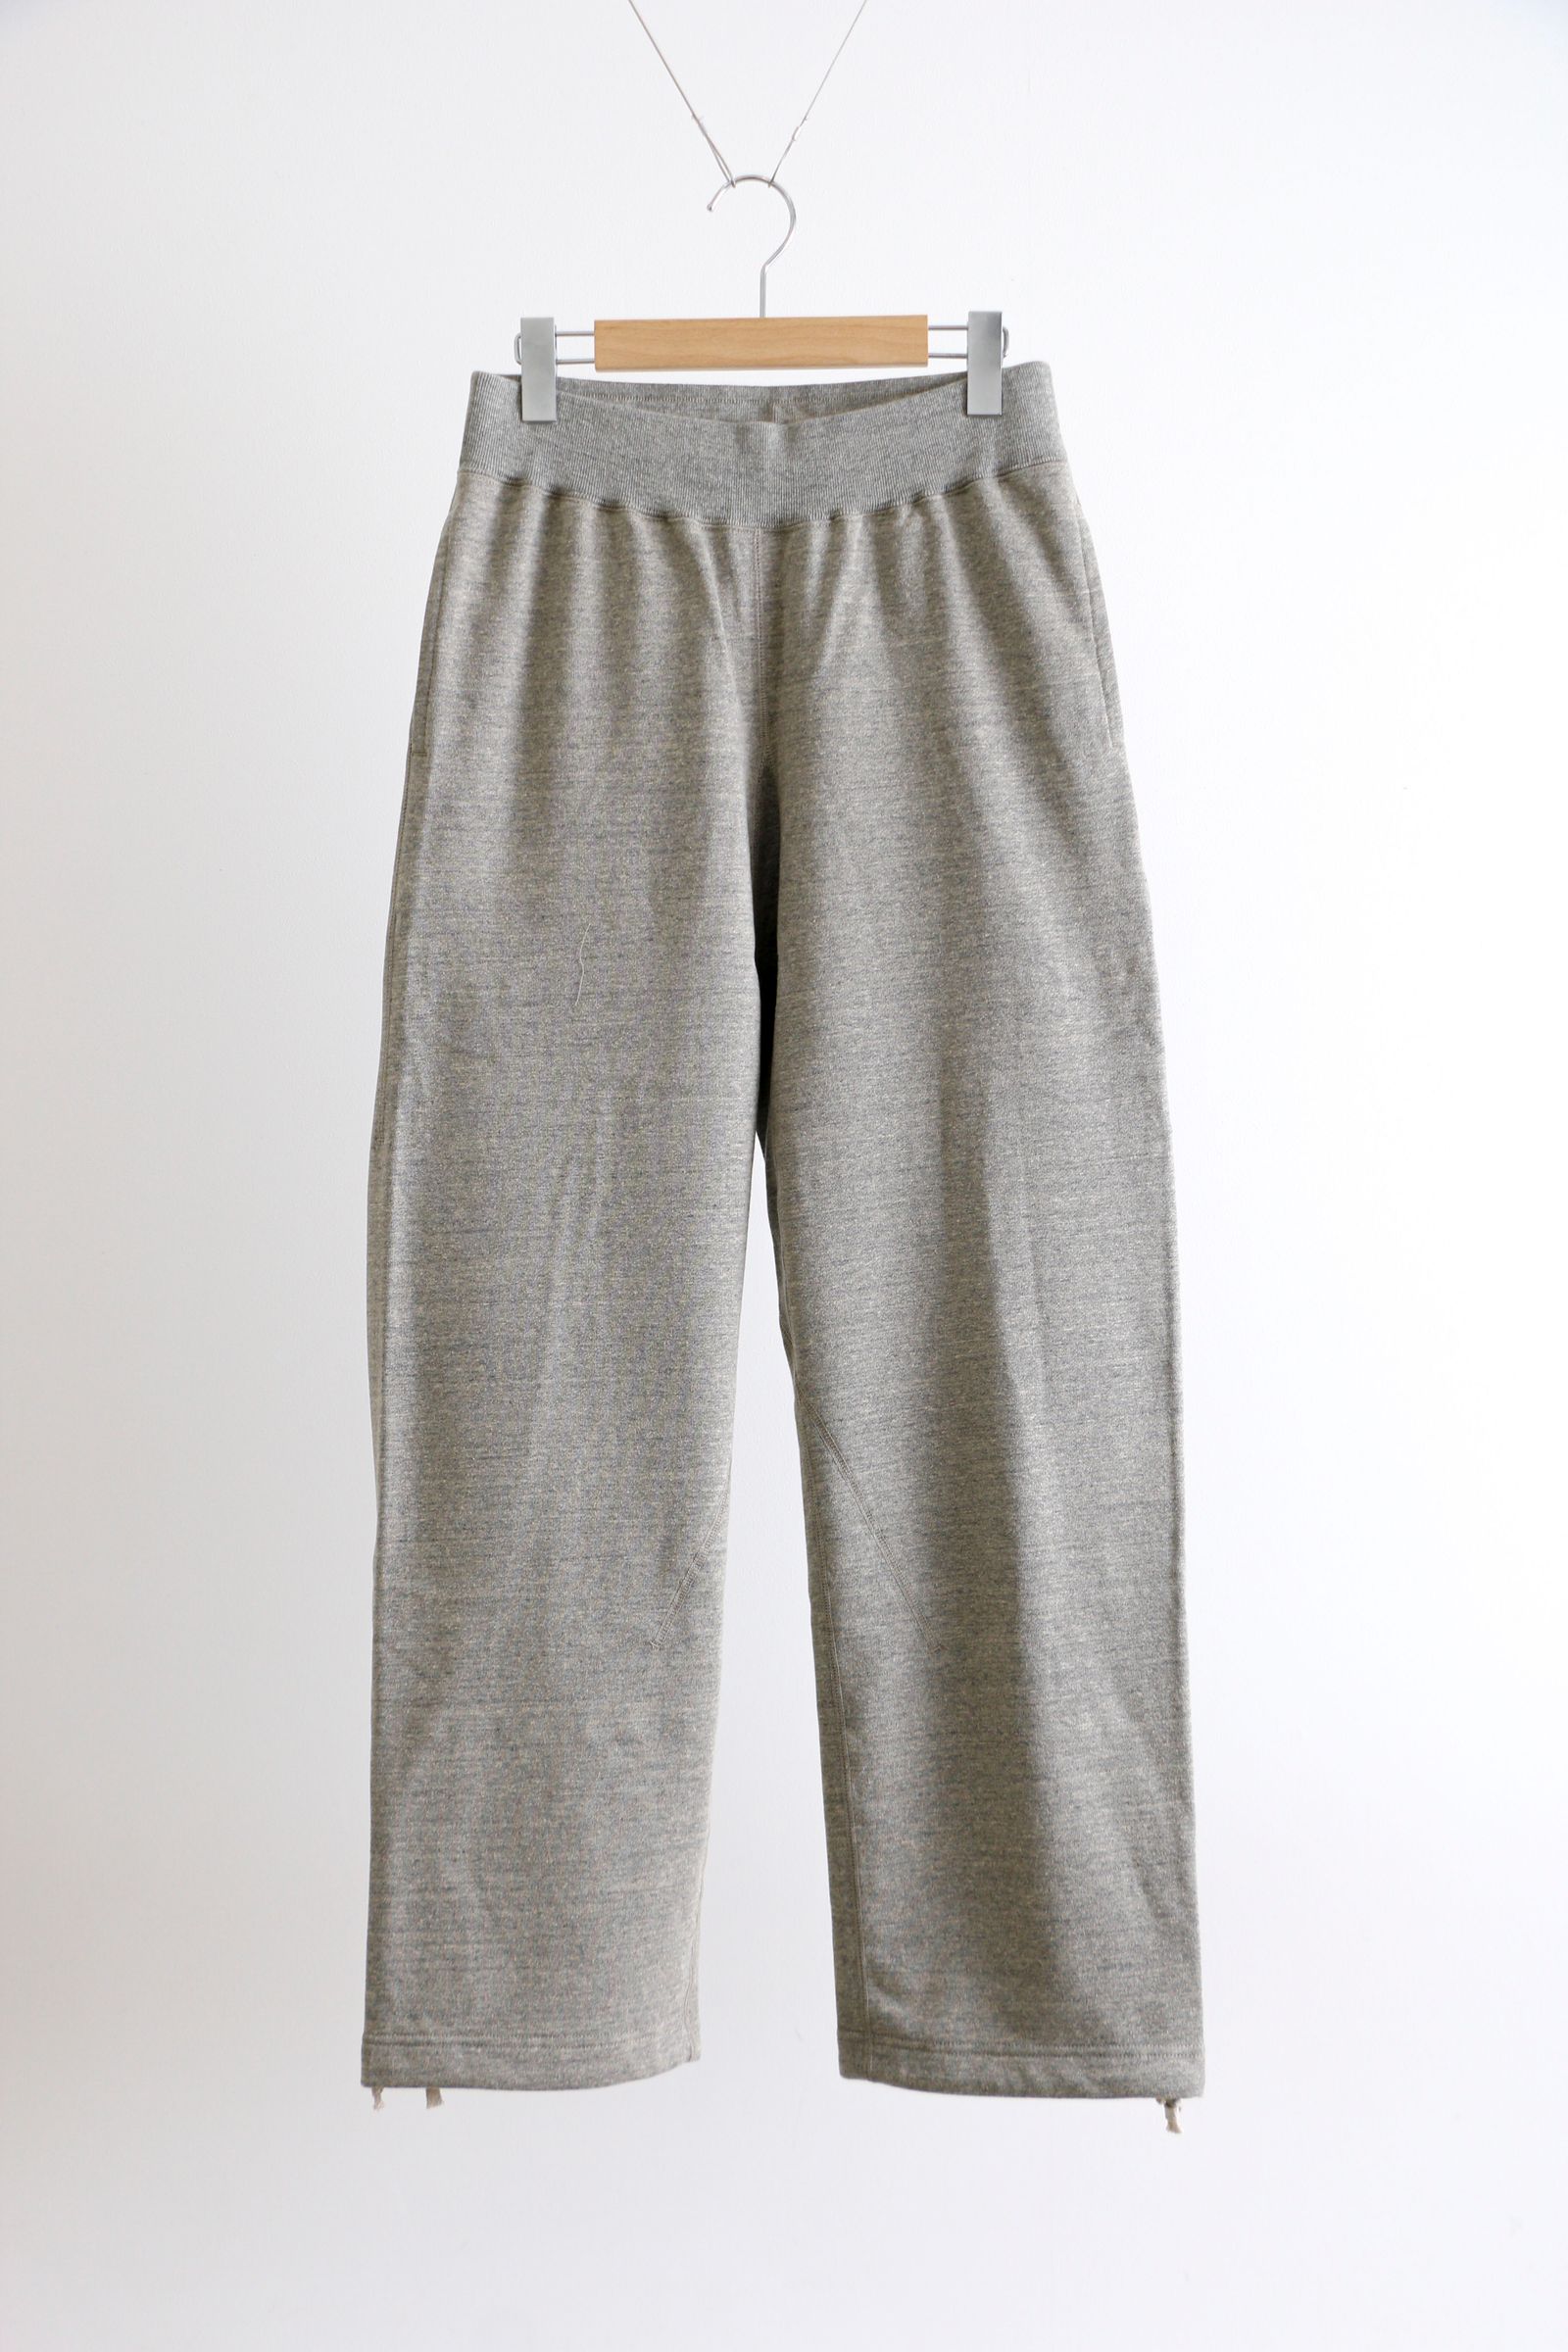 ULTERIOR - VINTAGE FADED TERRY SWEAT PANTS Fade